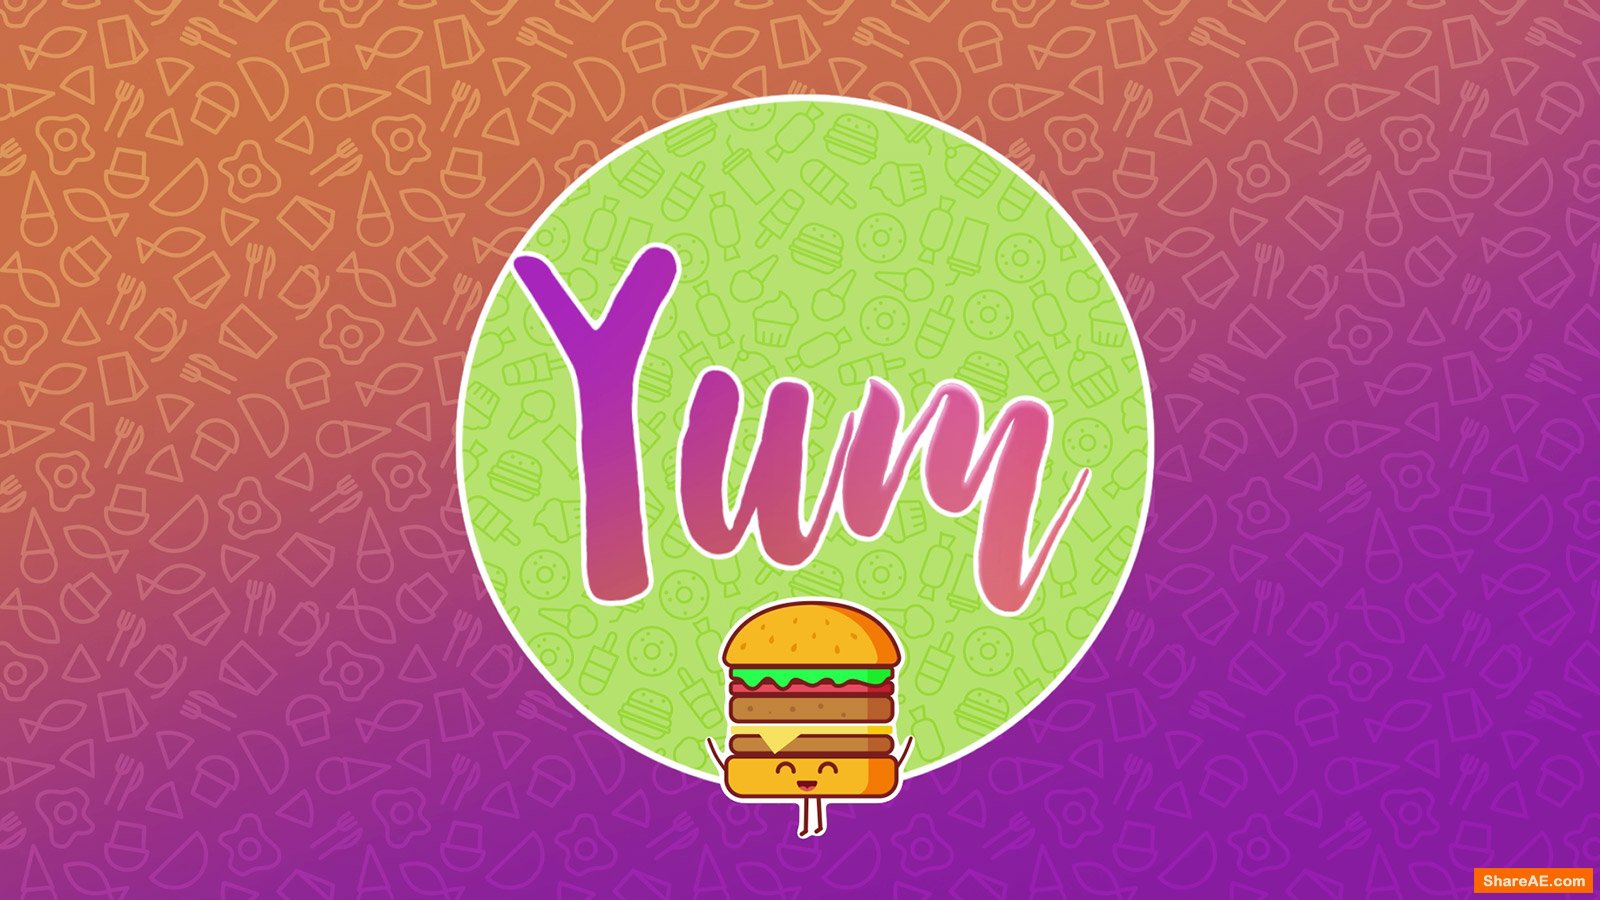 Yum - 100+ Assets for Food Videos - Motion Graphic (RocketStock)